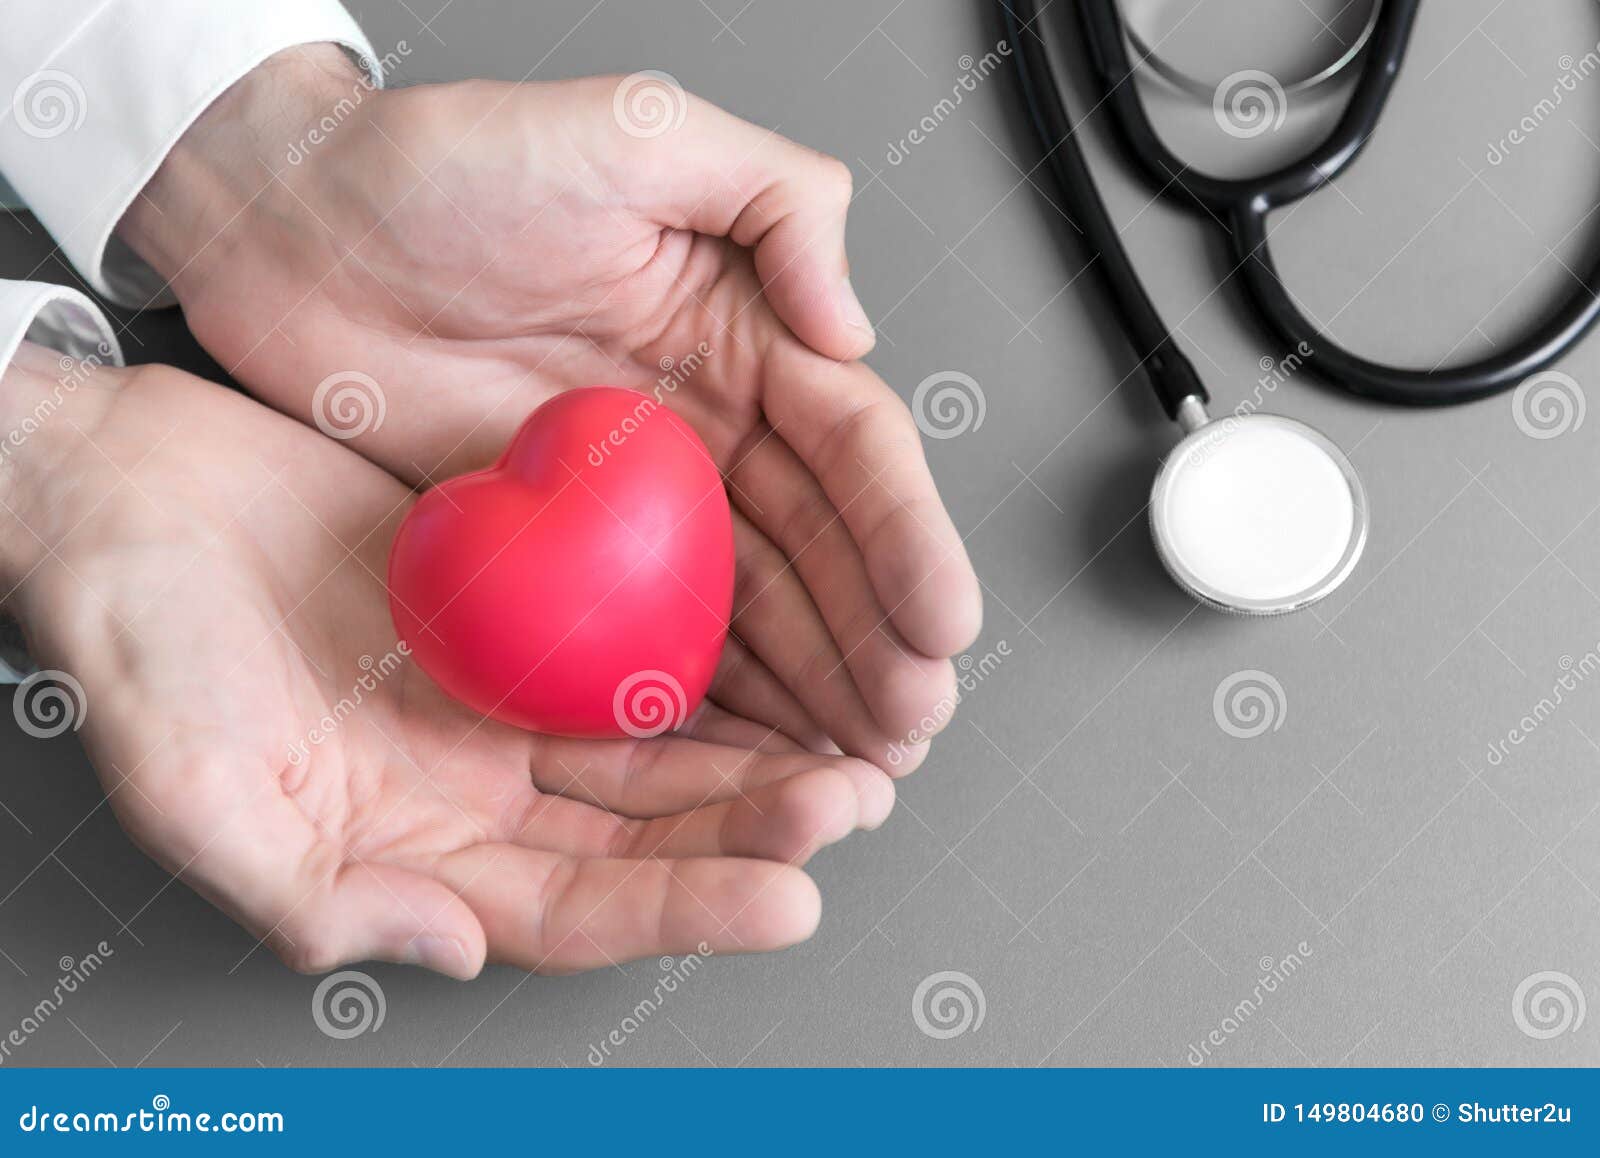 doctor hands holding and give red massage heart to patient for recover from sickness. hospital and healthcare concept. cpr and